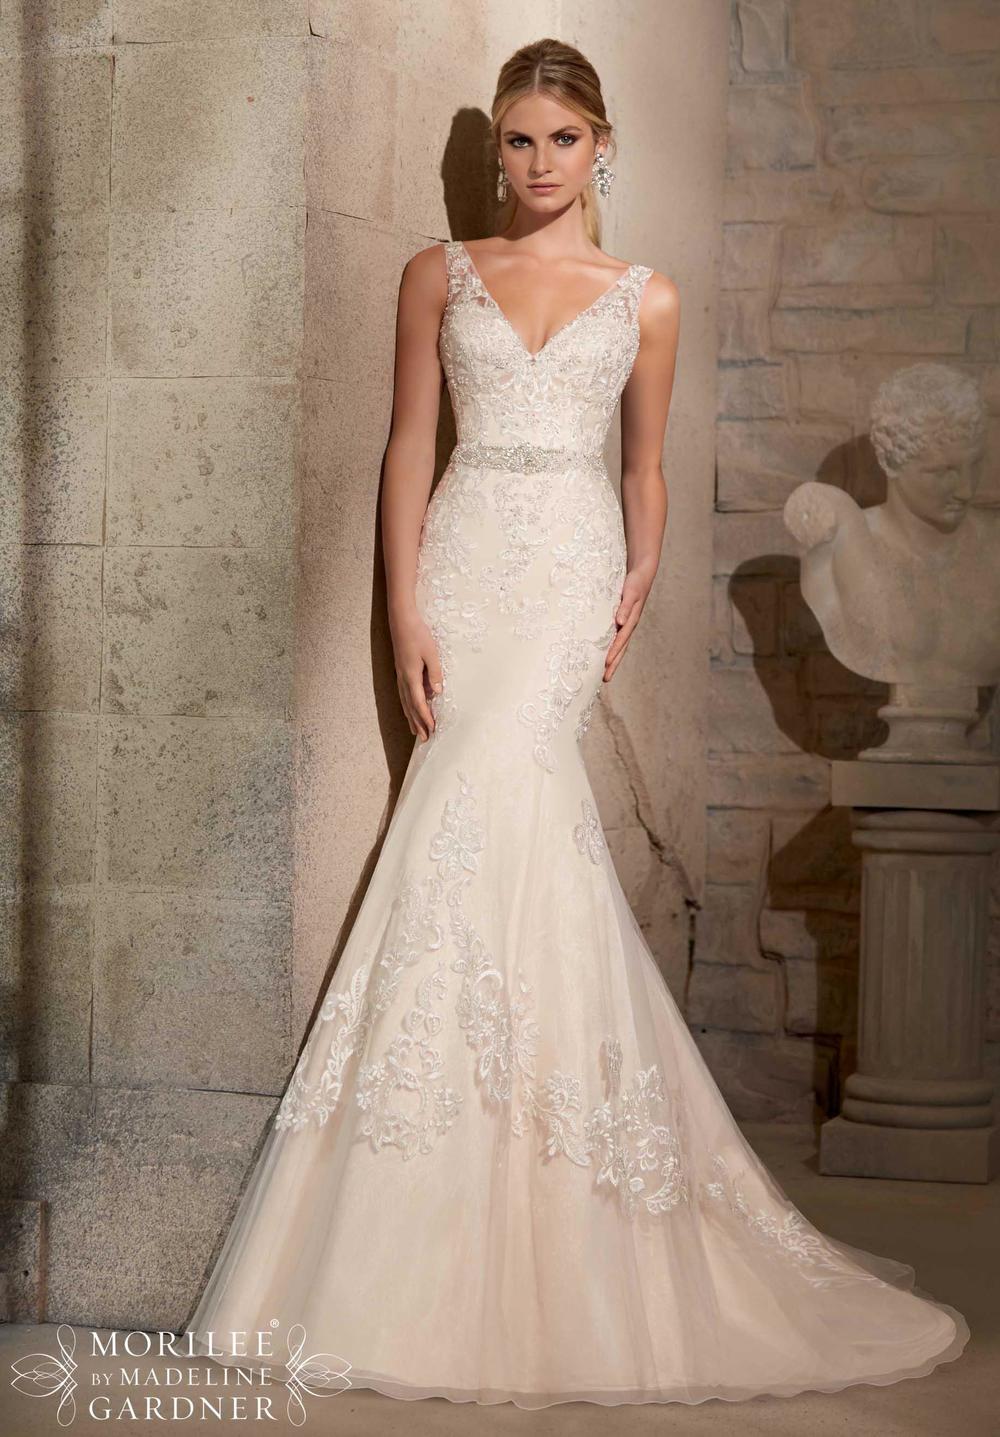 Details about  / Embroidery Appliques Wedding Dresses Halter Neck Satin Bridal Gowns Sleeveless